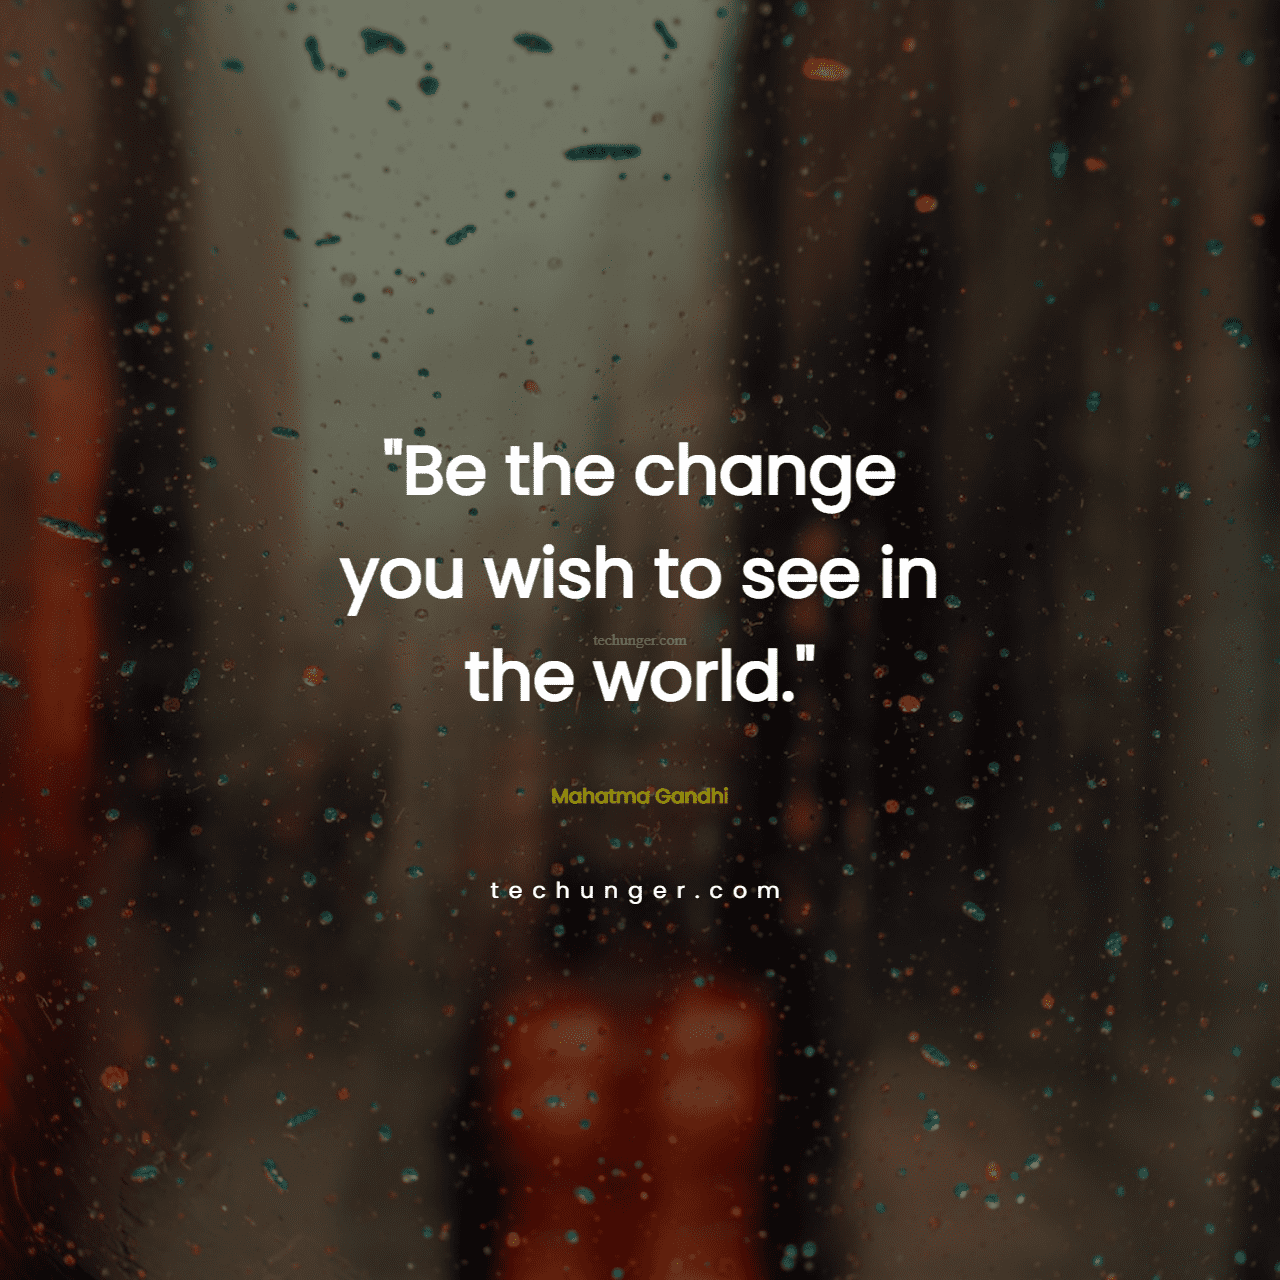 motivational,inspirational,quotes,Be the change you wish to see in the world.
Mahatma Gandhi